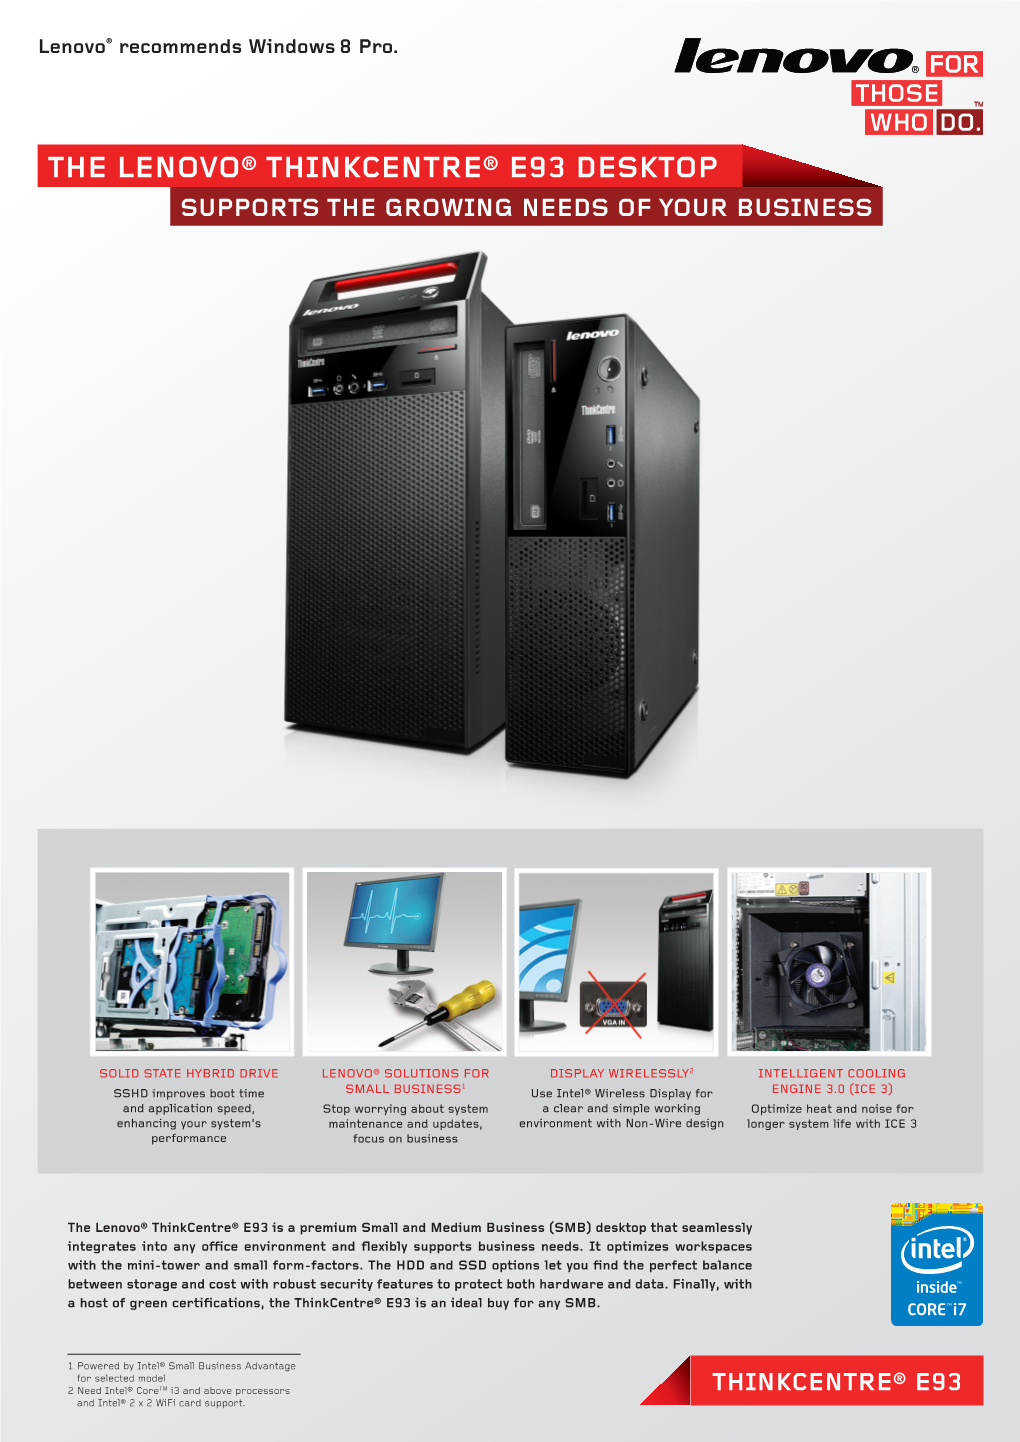 The Lenovo® Thinkcentre® E93 Desktop Supports the Growing Needs of Your Business